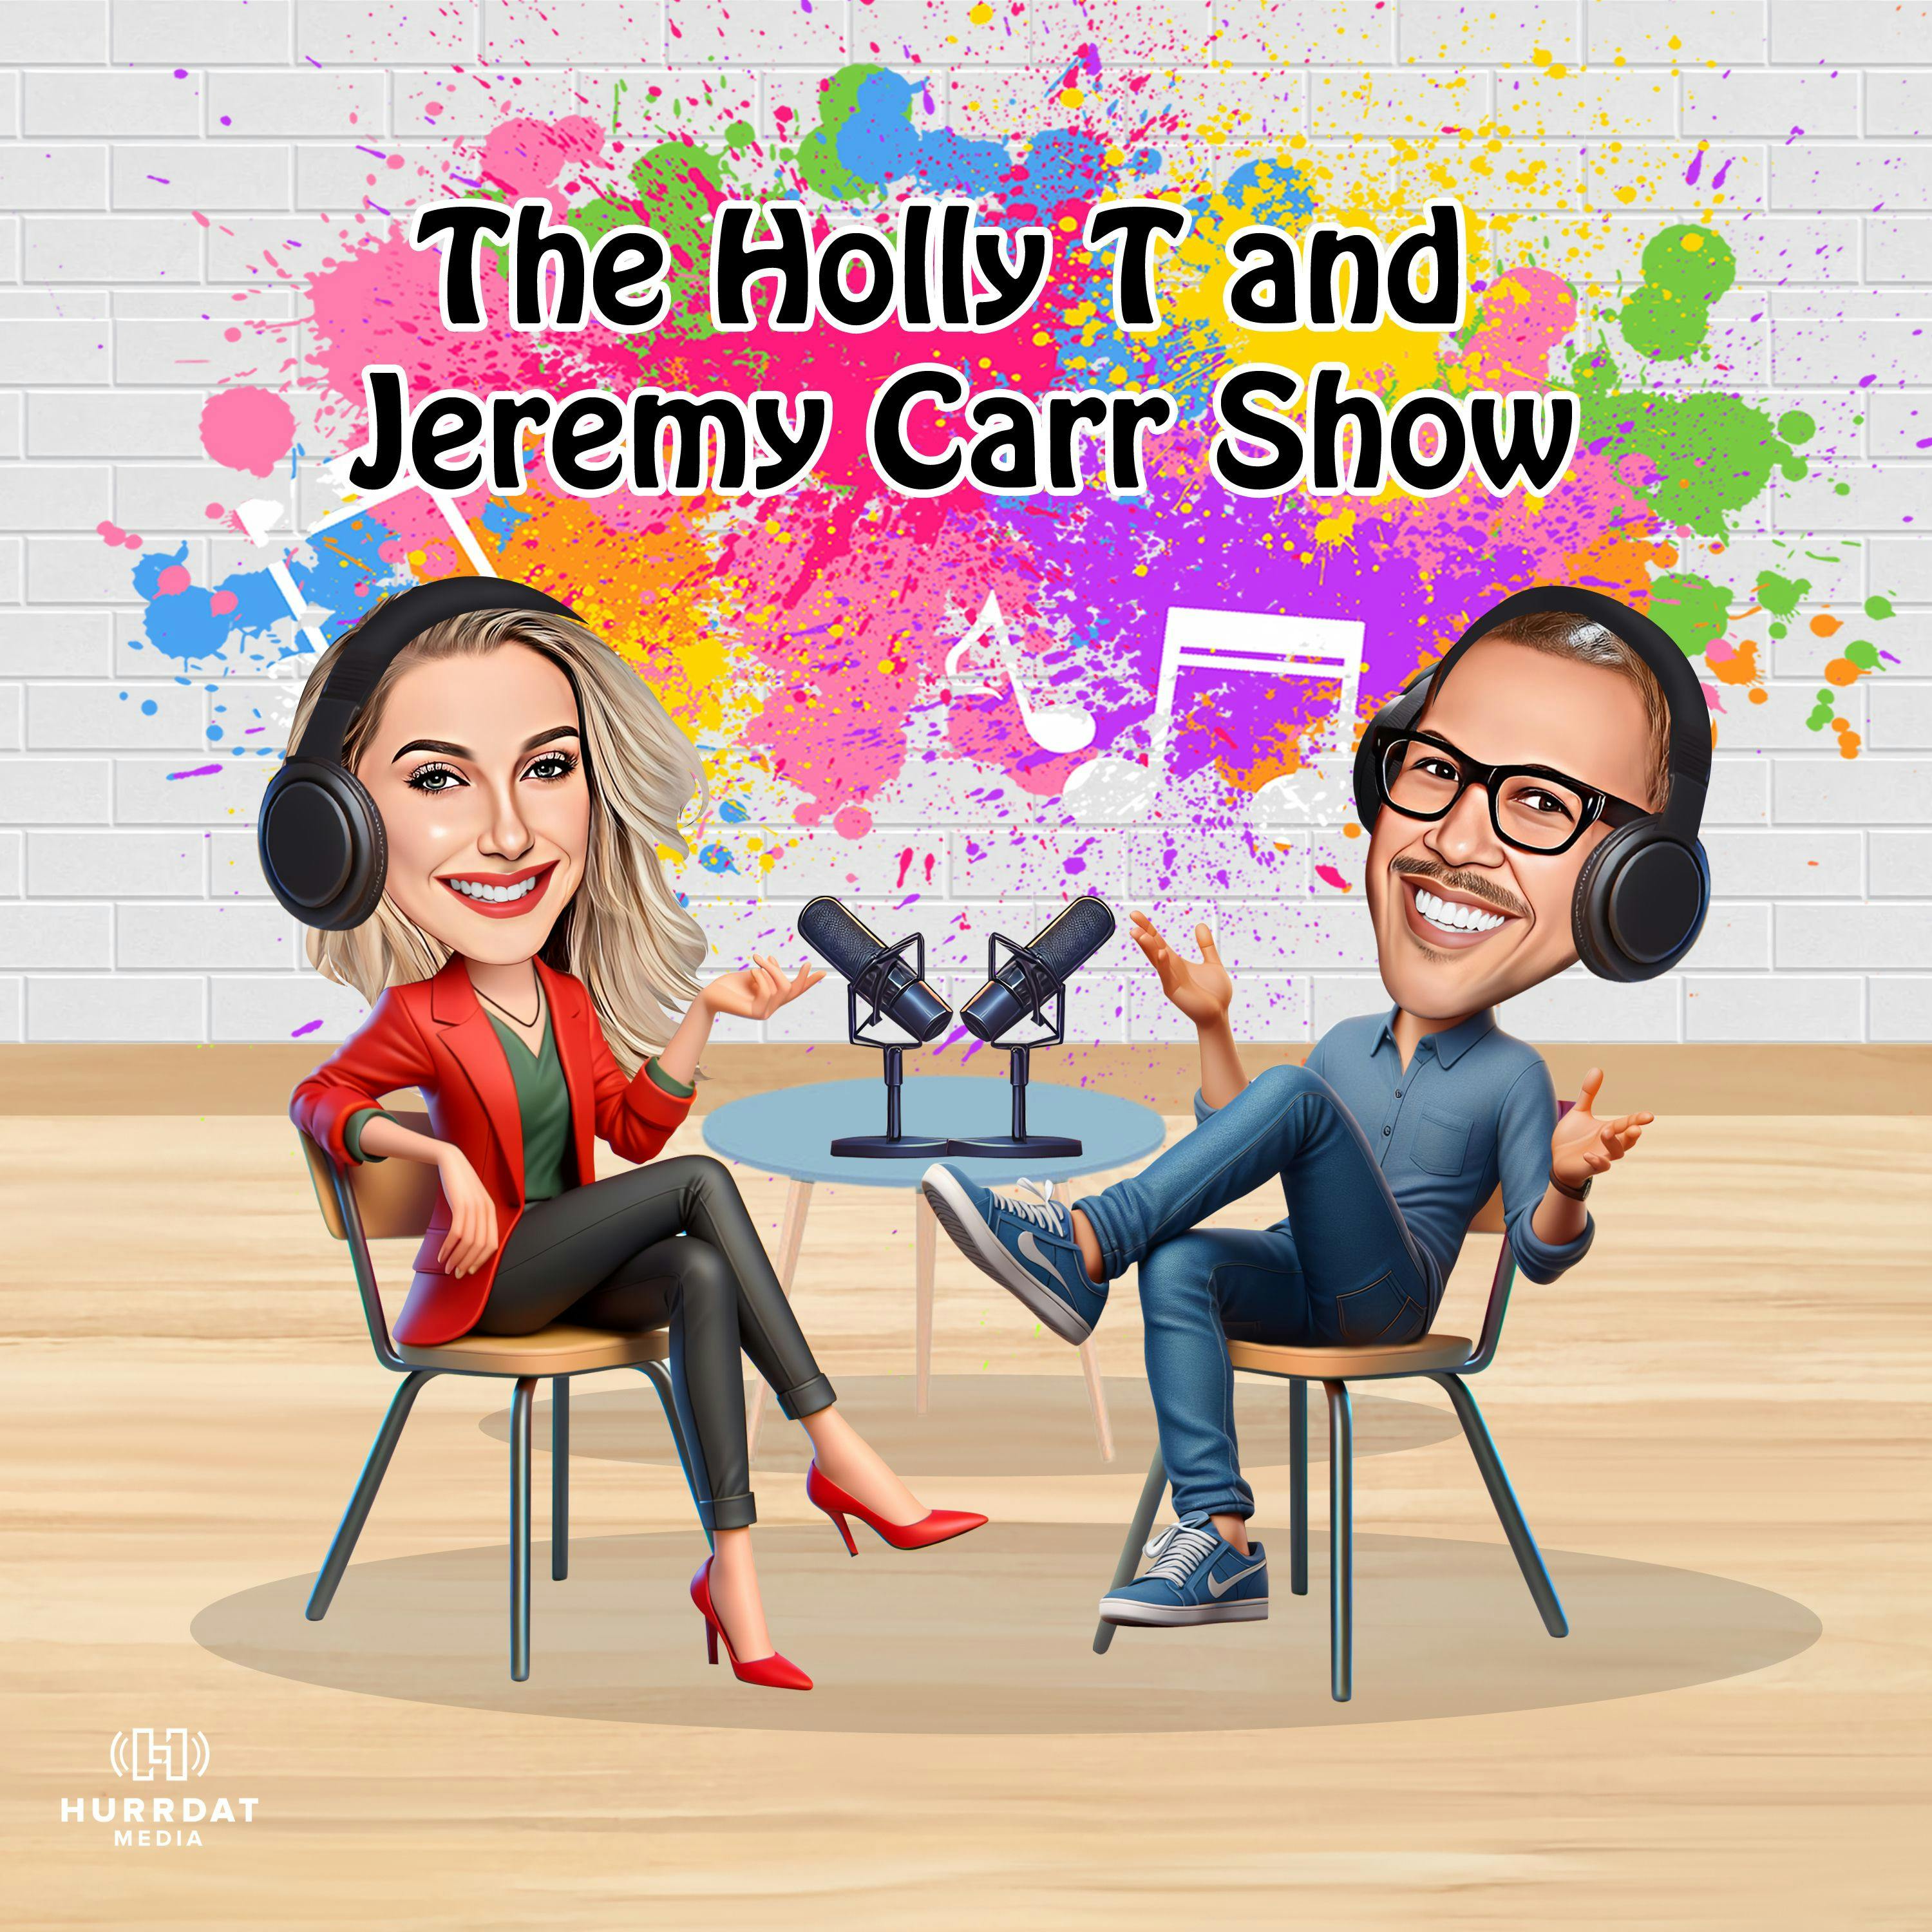 You Might Also Like: The Holly T & Jeremy Carr Show